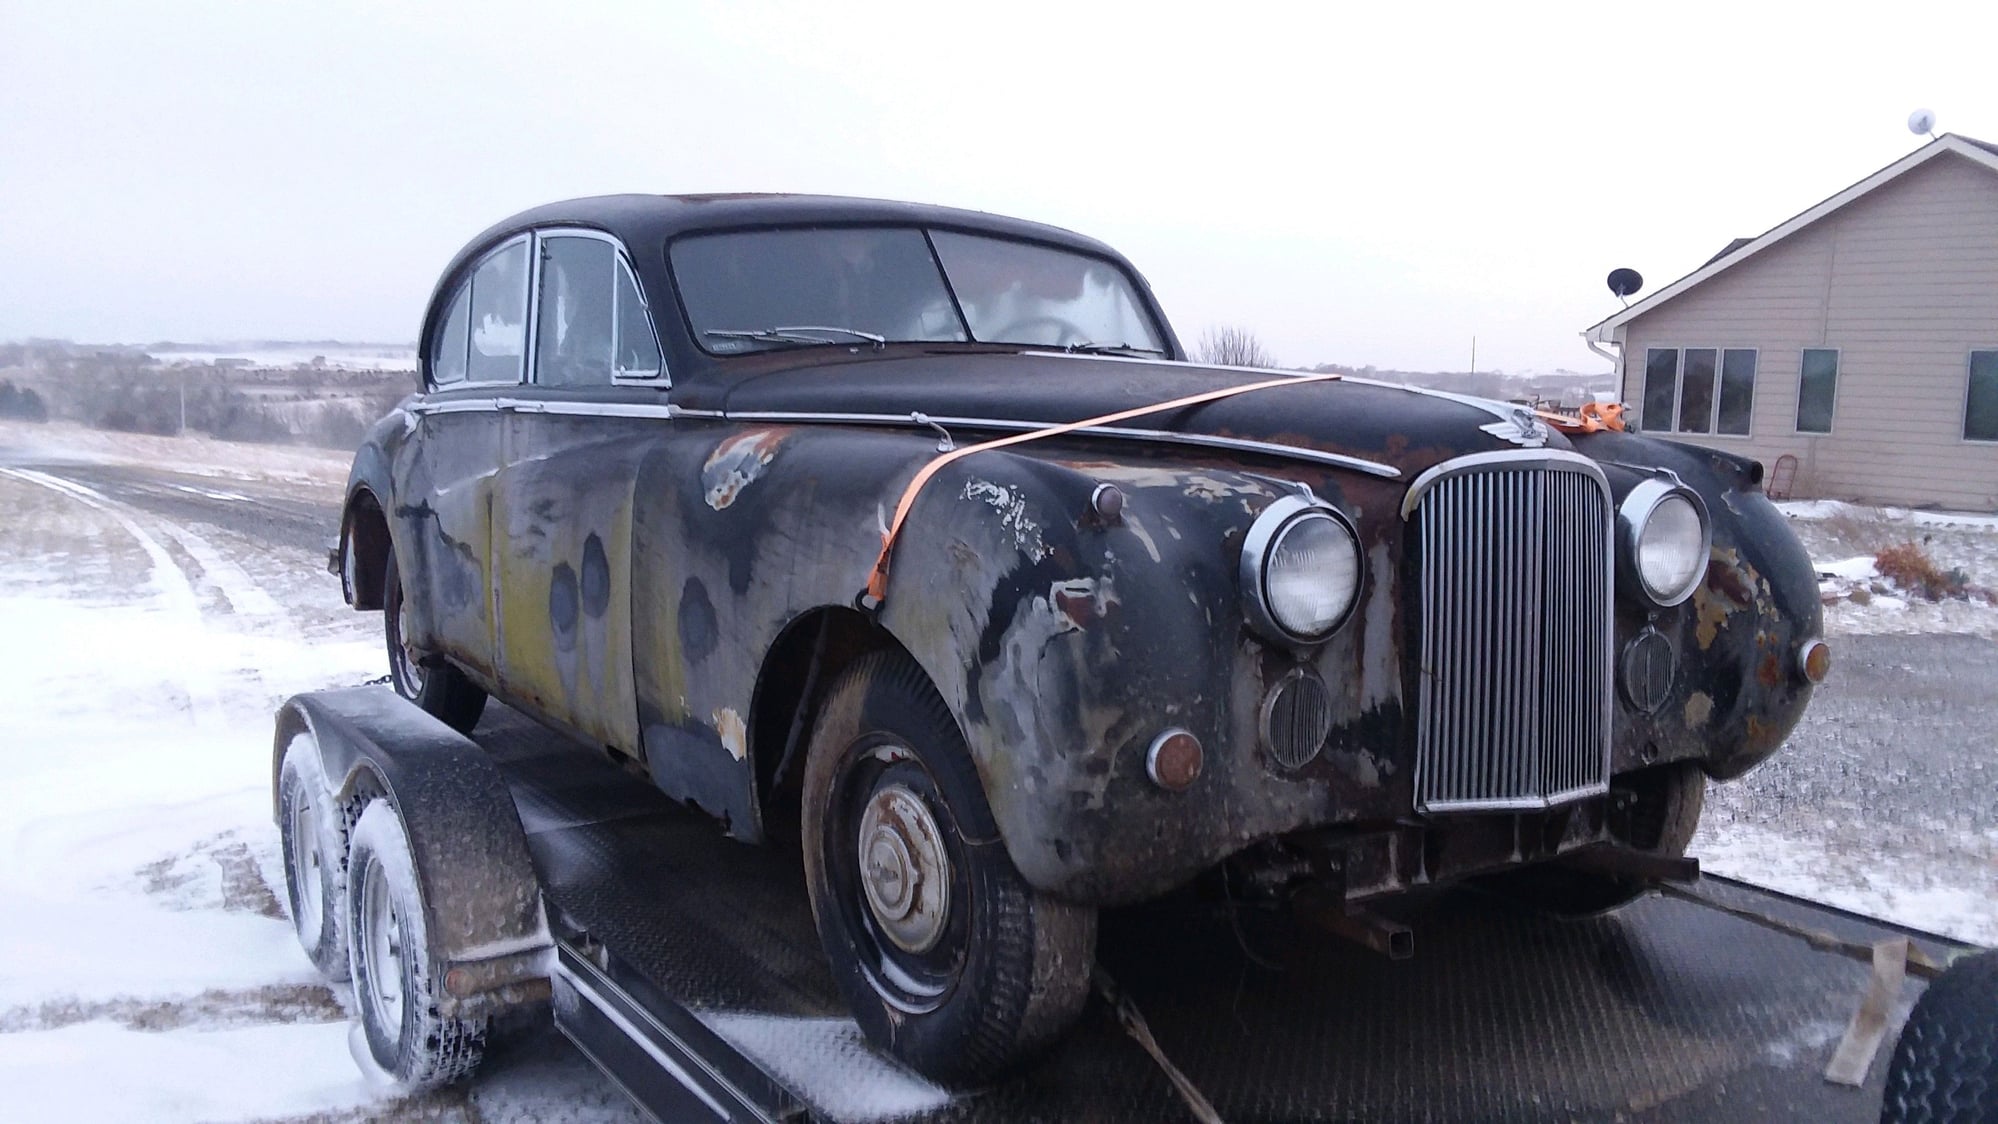 Exterior Body Parts - MK VII parts (some other applications too) - Used - 1955 Jaguar Mark VII - Lincoln, NE 68521, United States